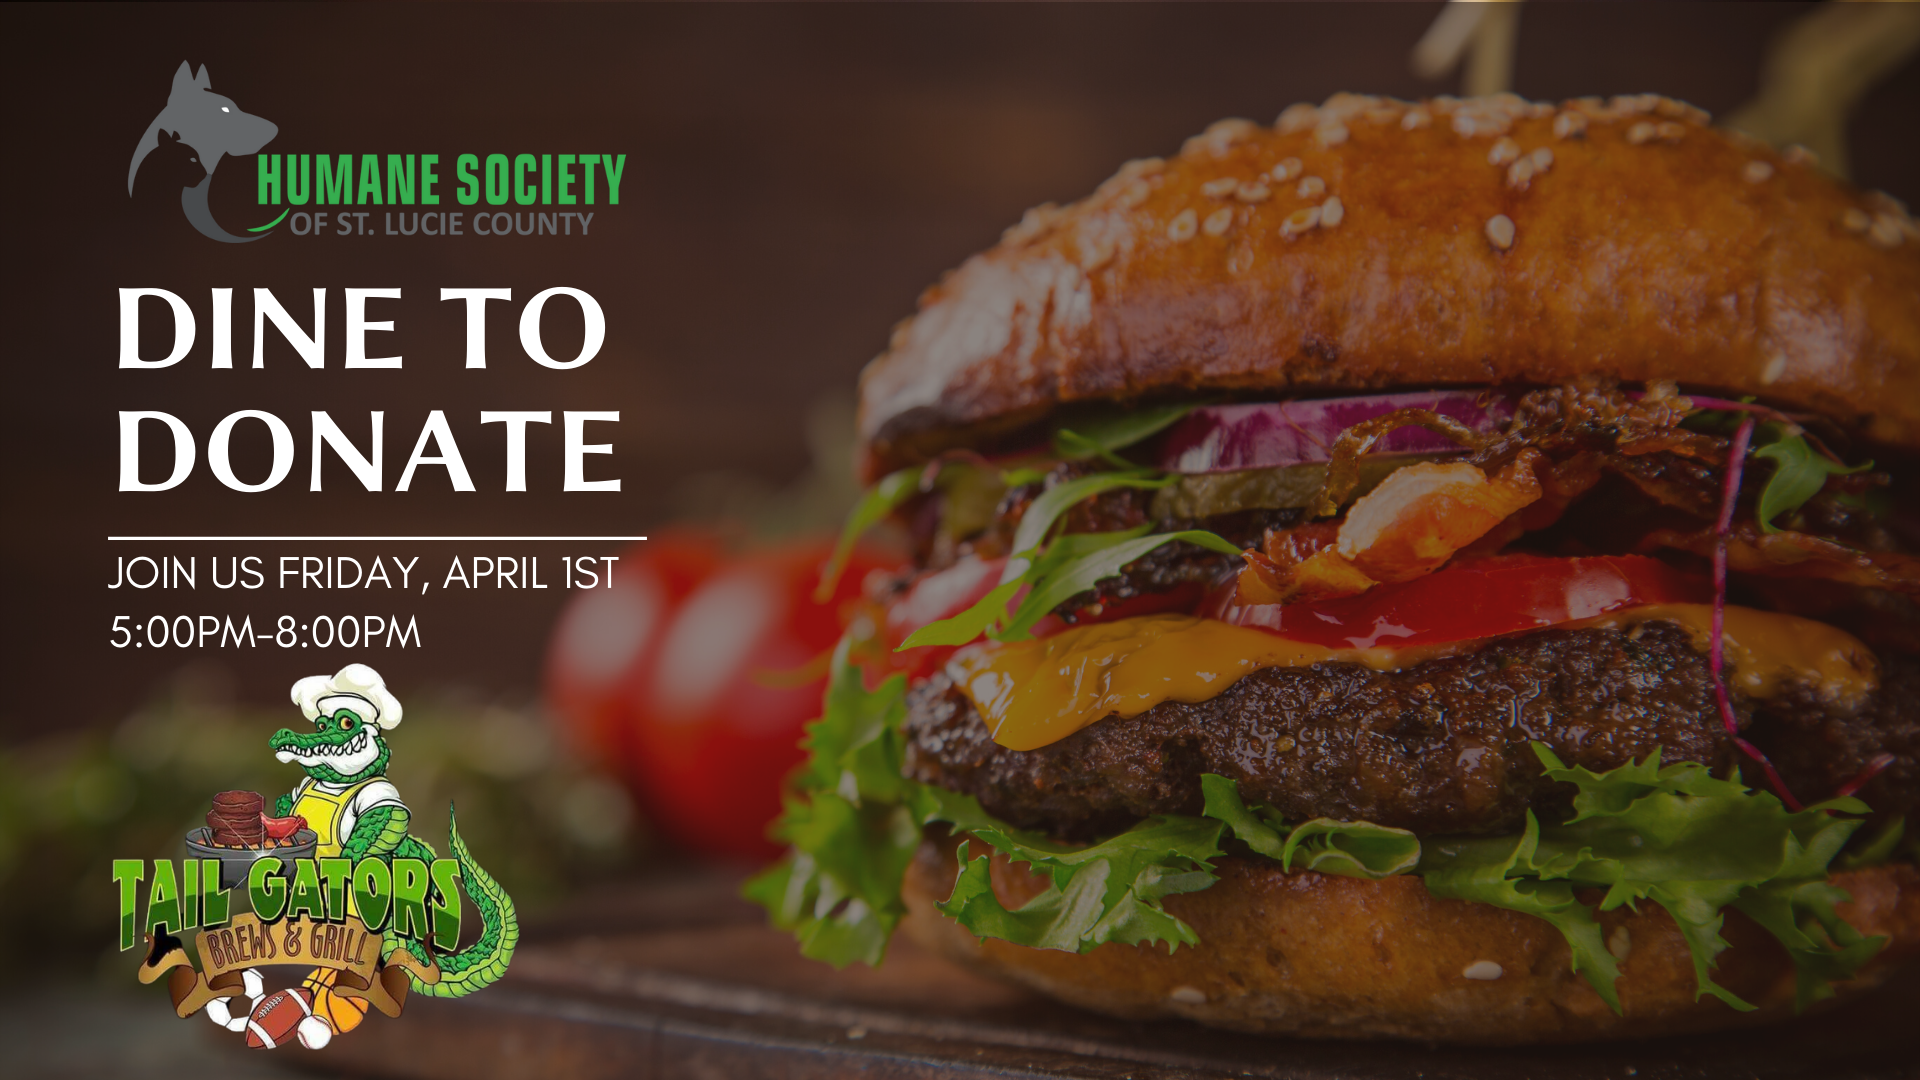 Dine to Donate at Tail Gators for the Humane Society of St. Lucie County